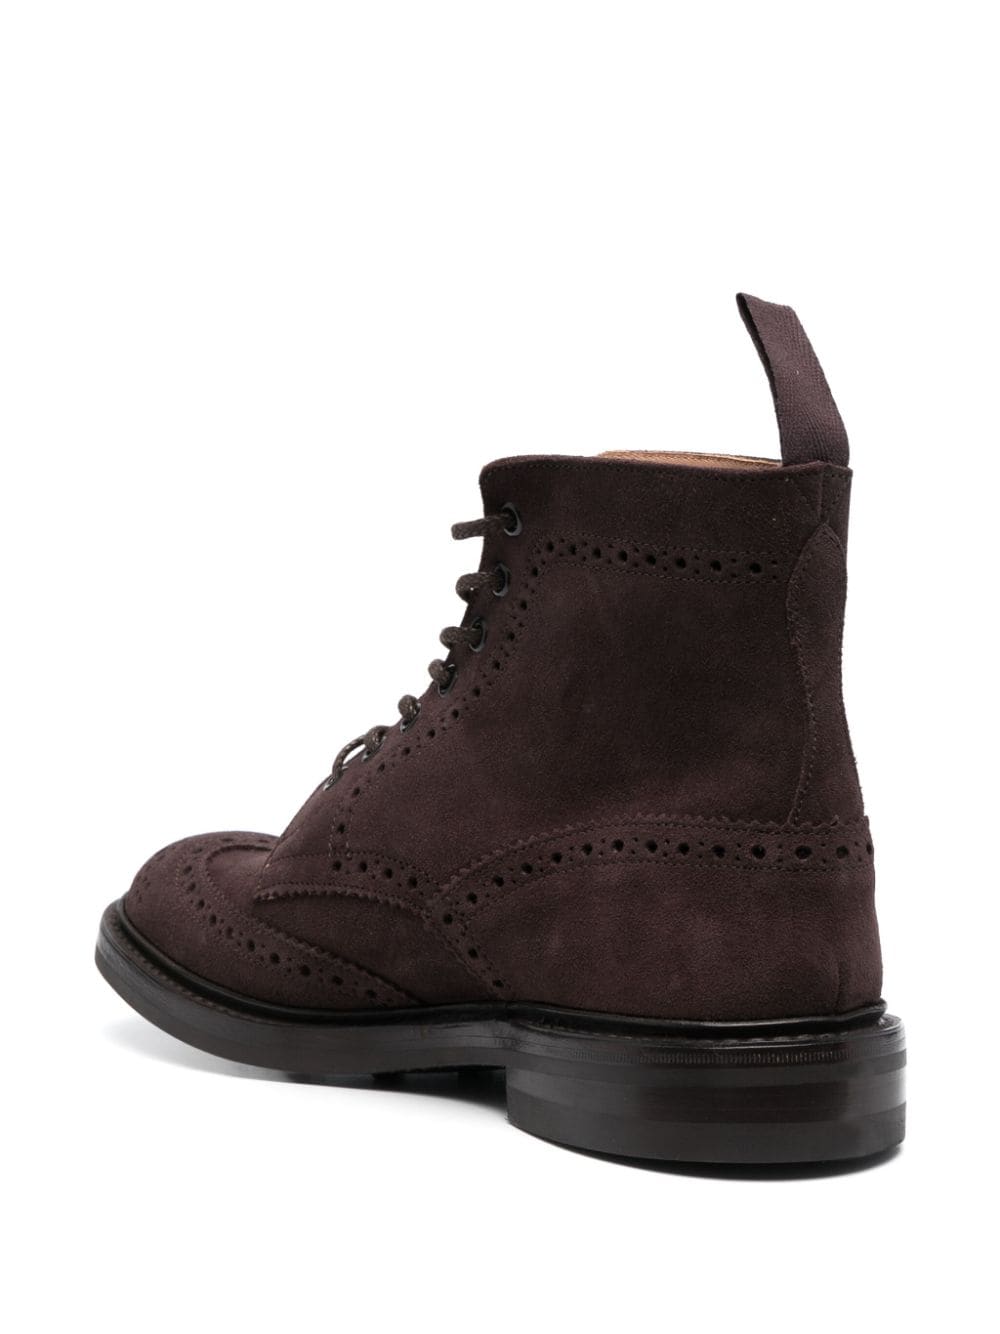 Shop Tricker's Stow Dainite Sole In Coffee Ox Reserved